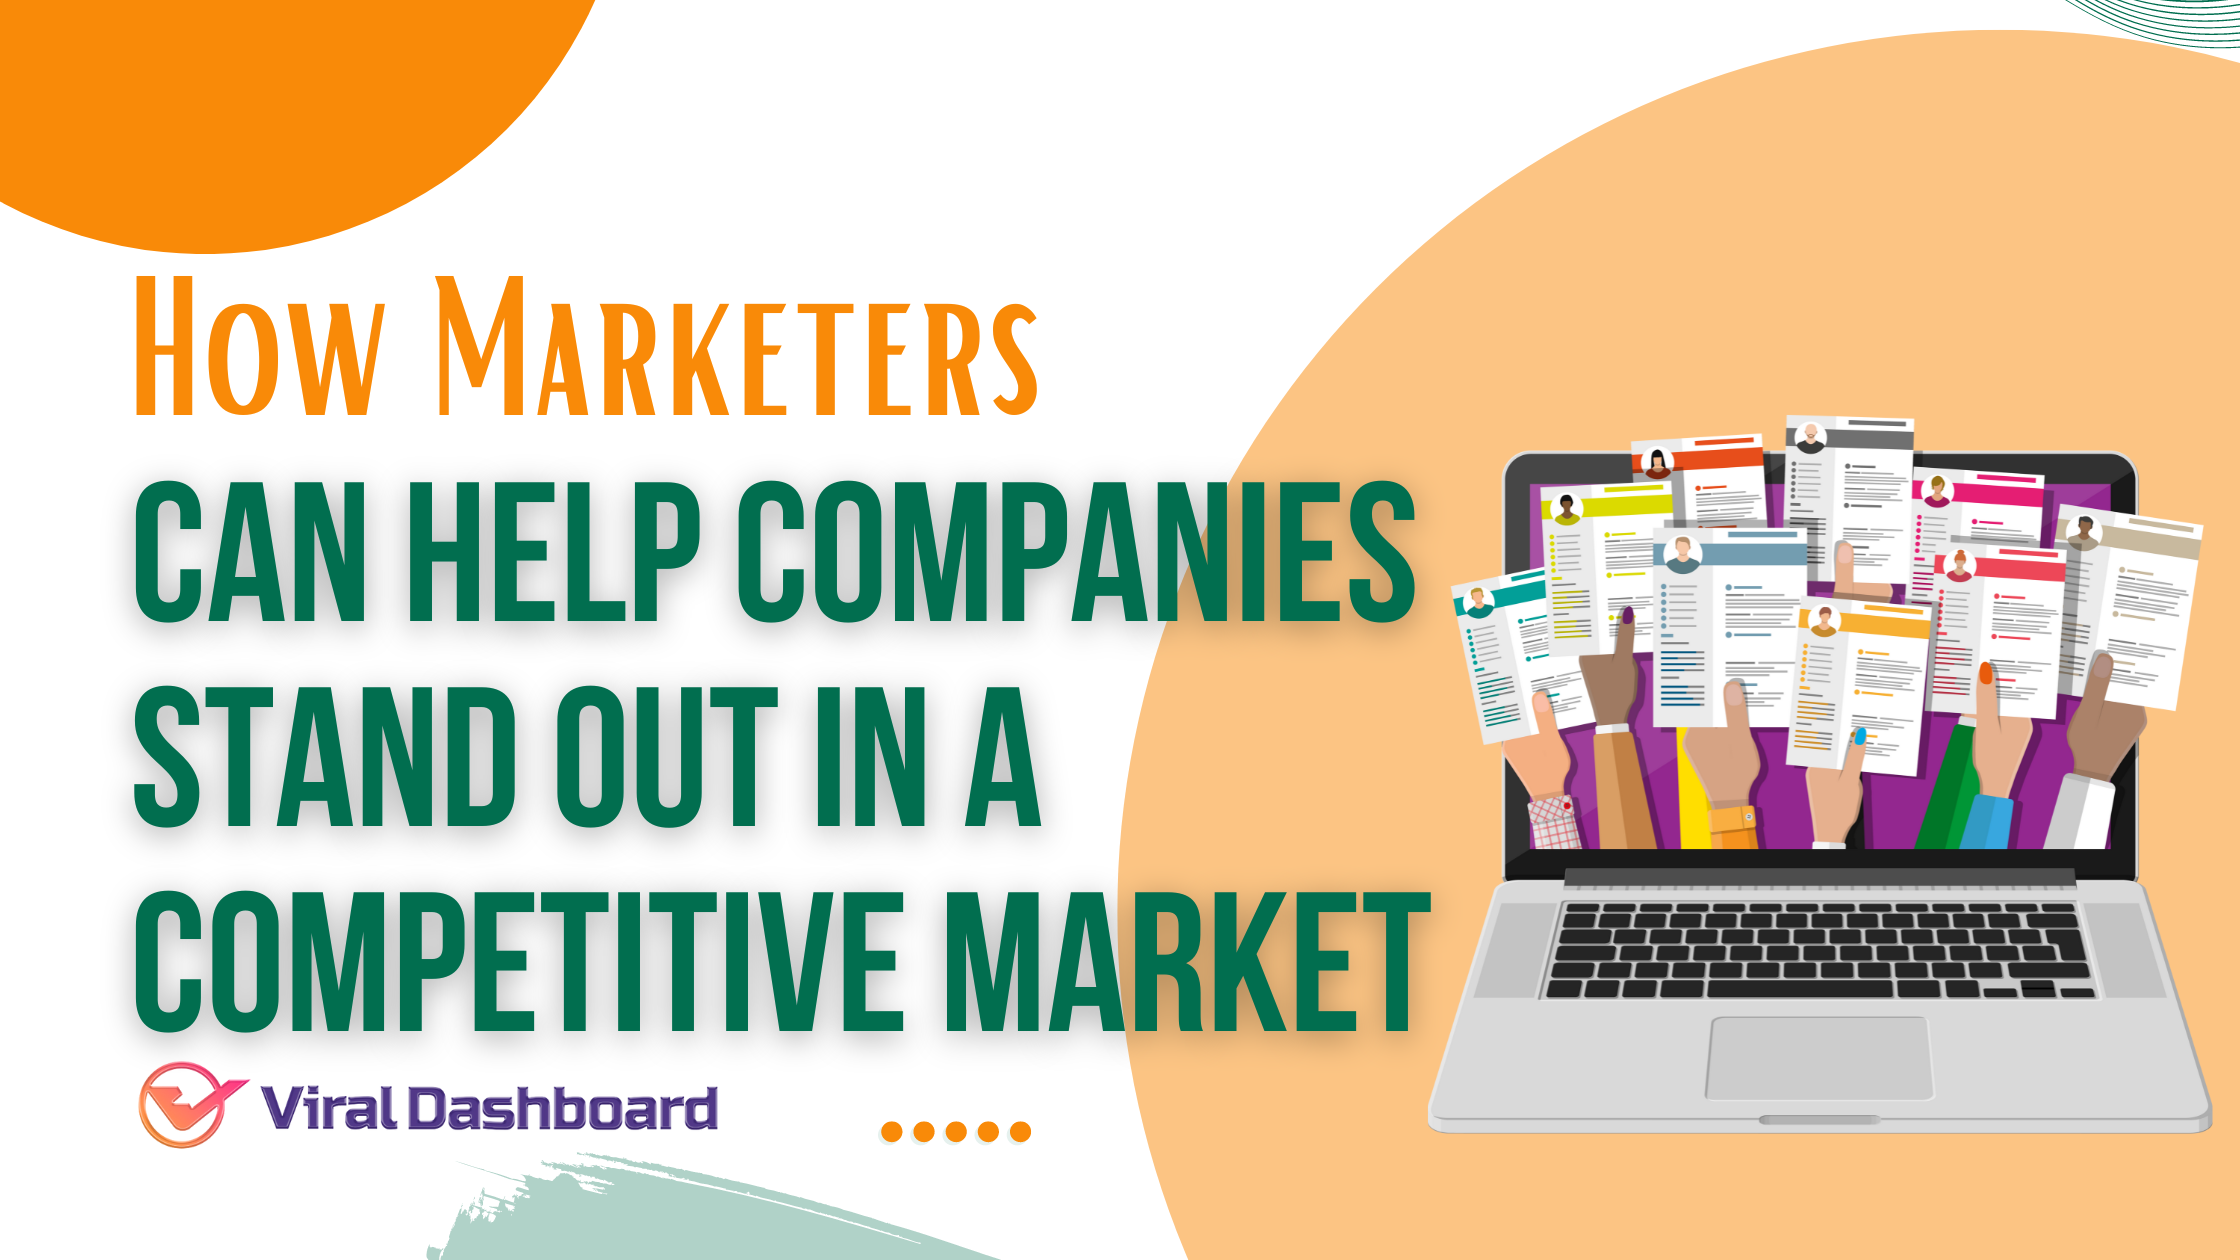 How Marketers Can Help Companies Stand Out in a Competitive Market?